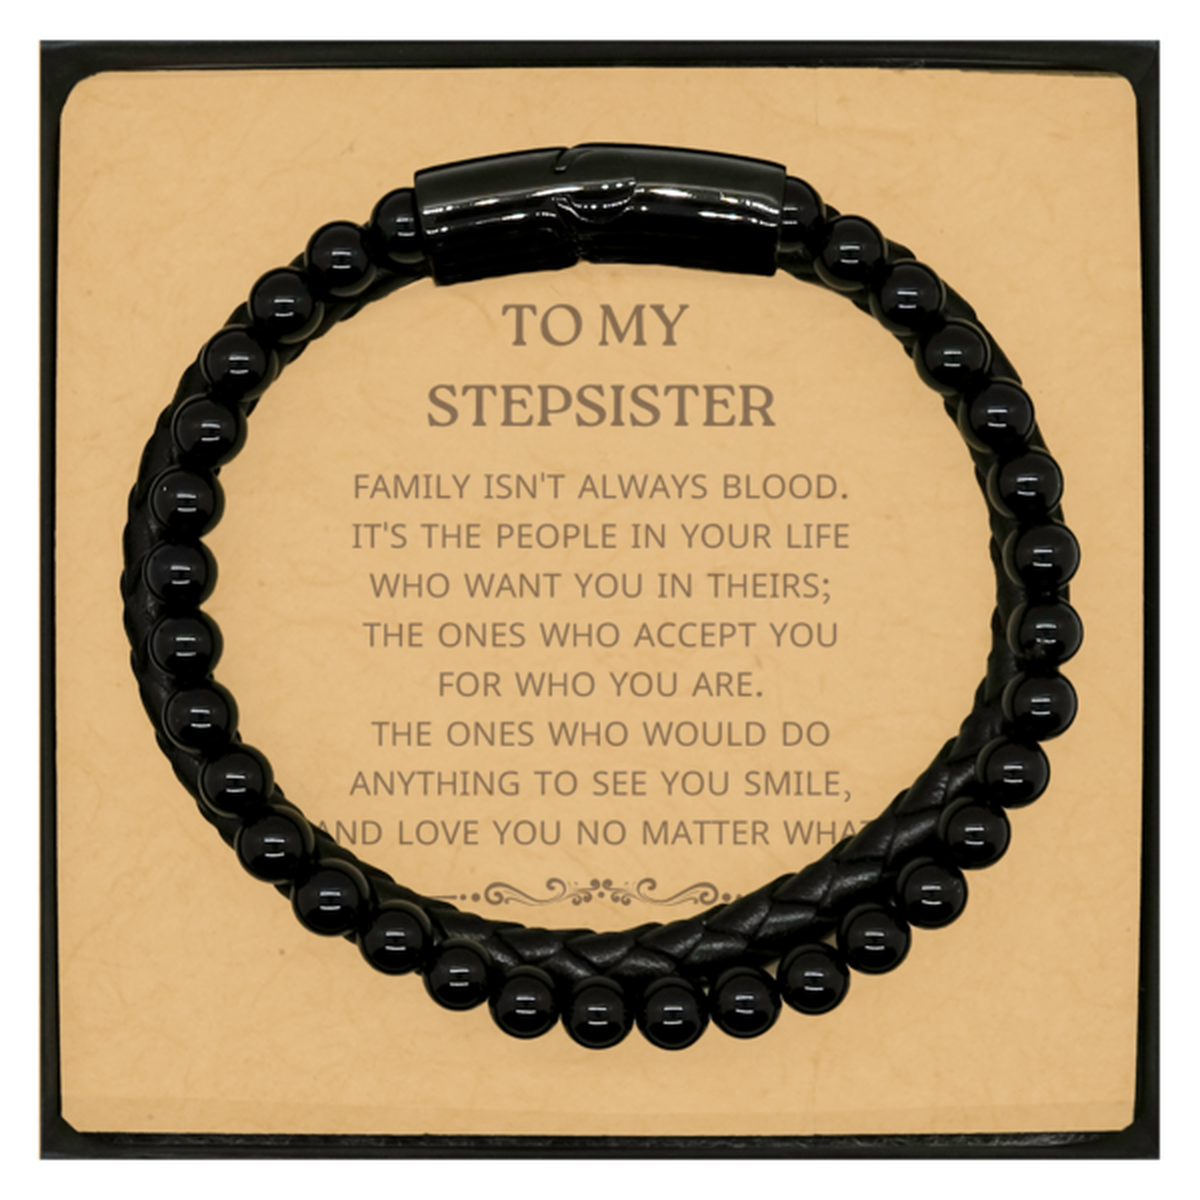 To My Stepsister Gifts, Family isn't always blood, Stepsister Stone Leather Bracelets, Birthday Christmas Unique Present For Stepsister